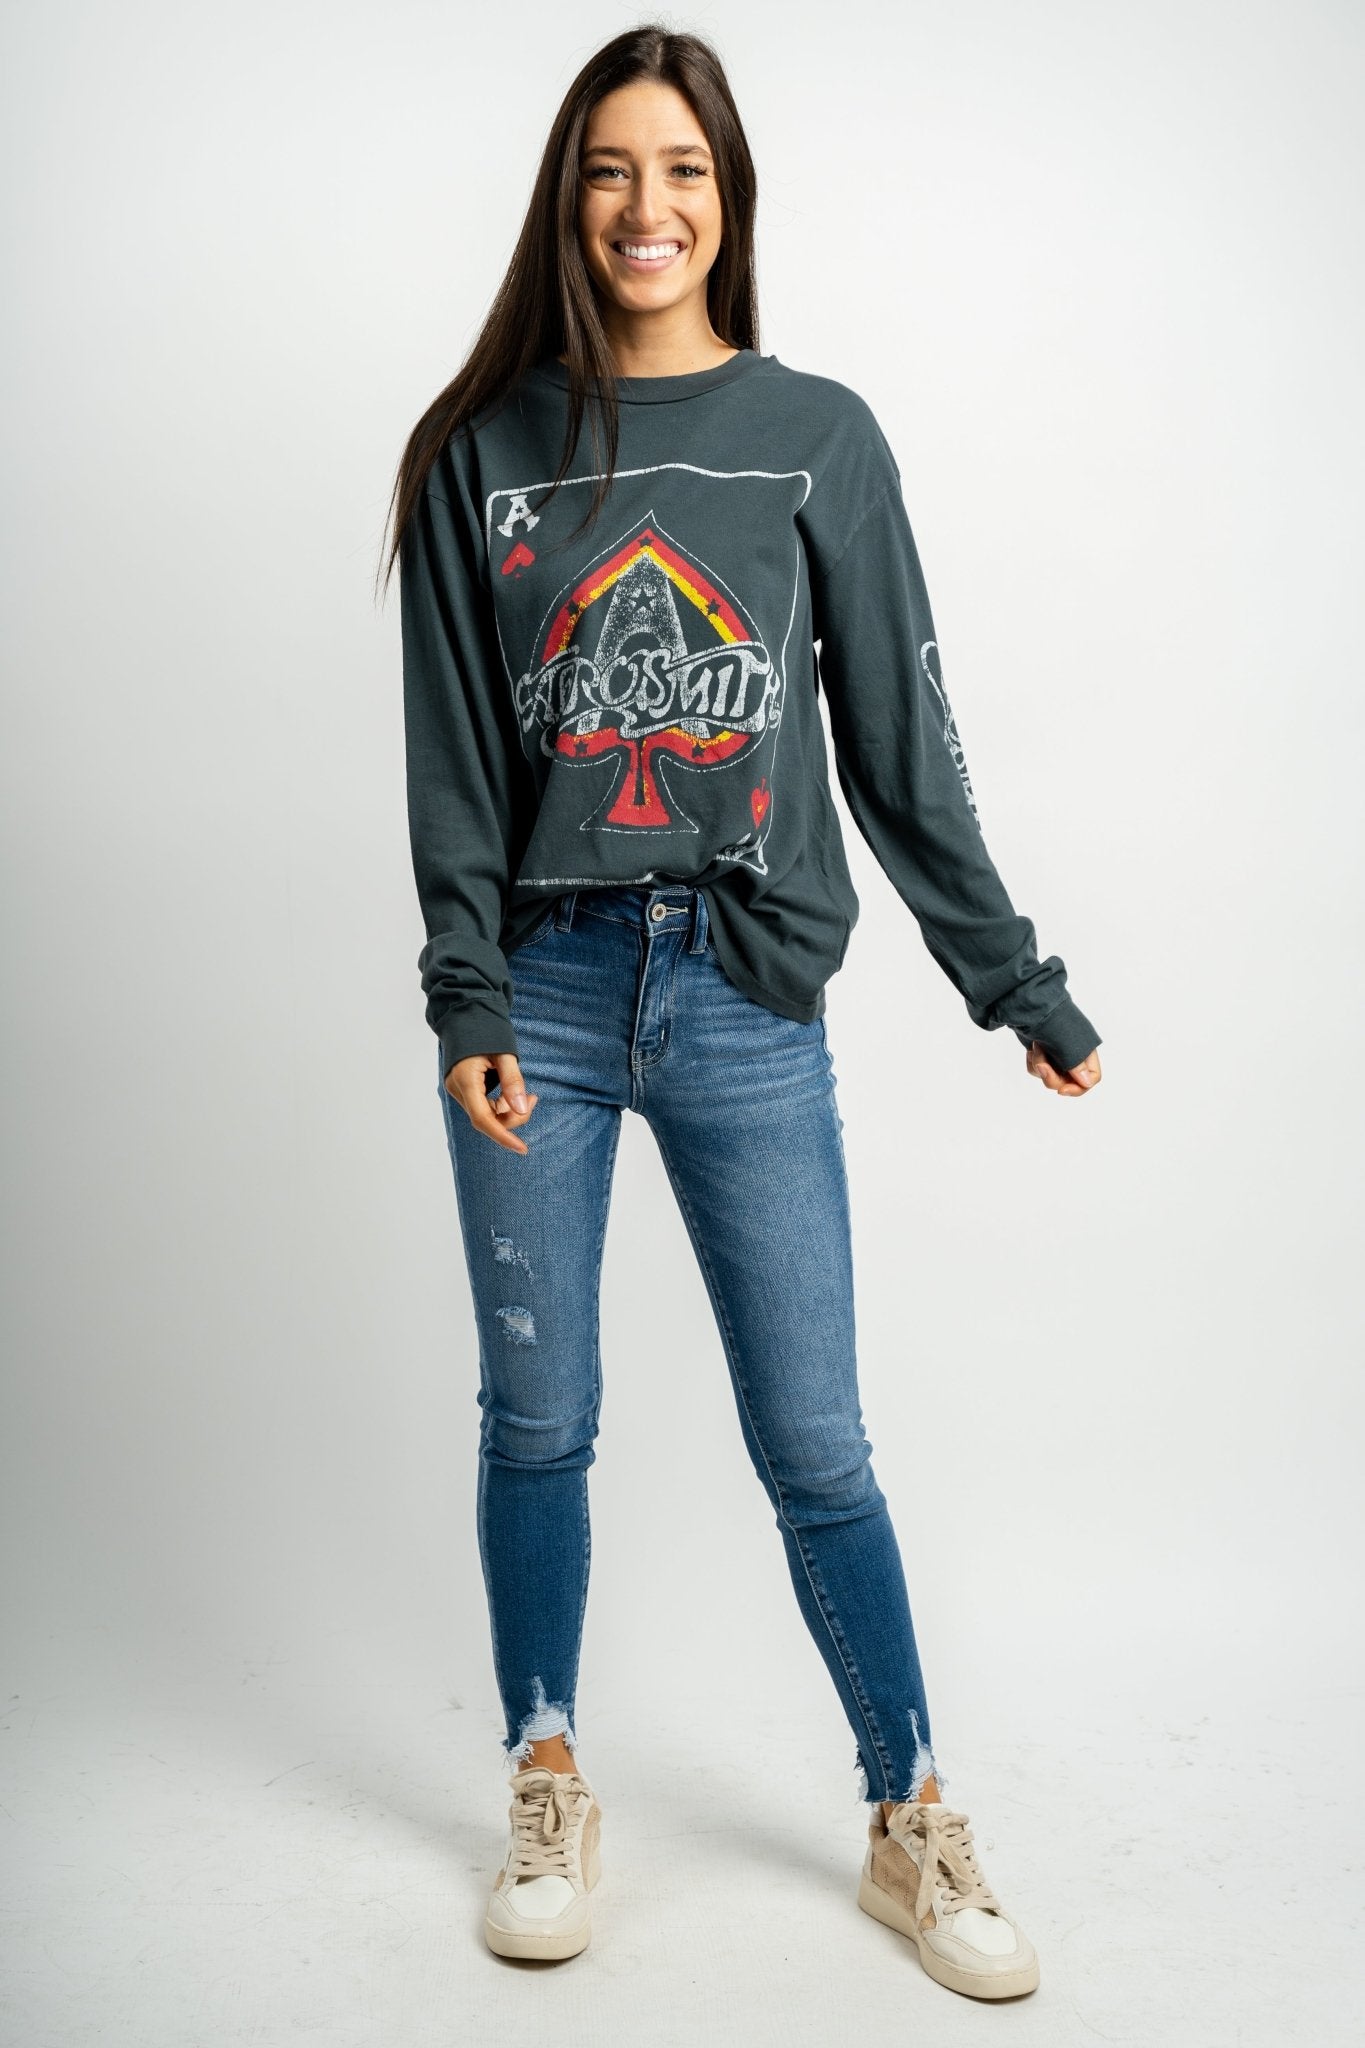 DayDreamer Aerosmith ace of spade long sleeve tee vintage black - DayDreamer Clothing at Lush Fashion Lounge Trendy Boutique in Oklahoma City